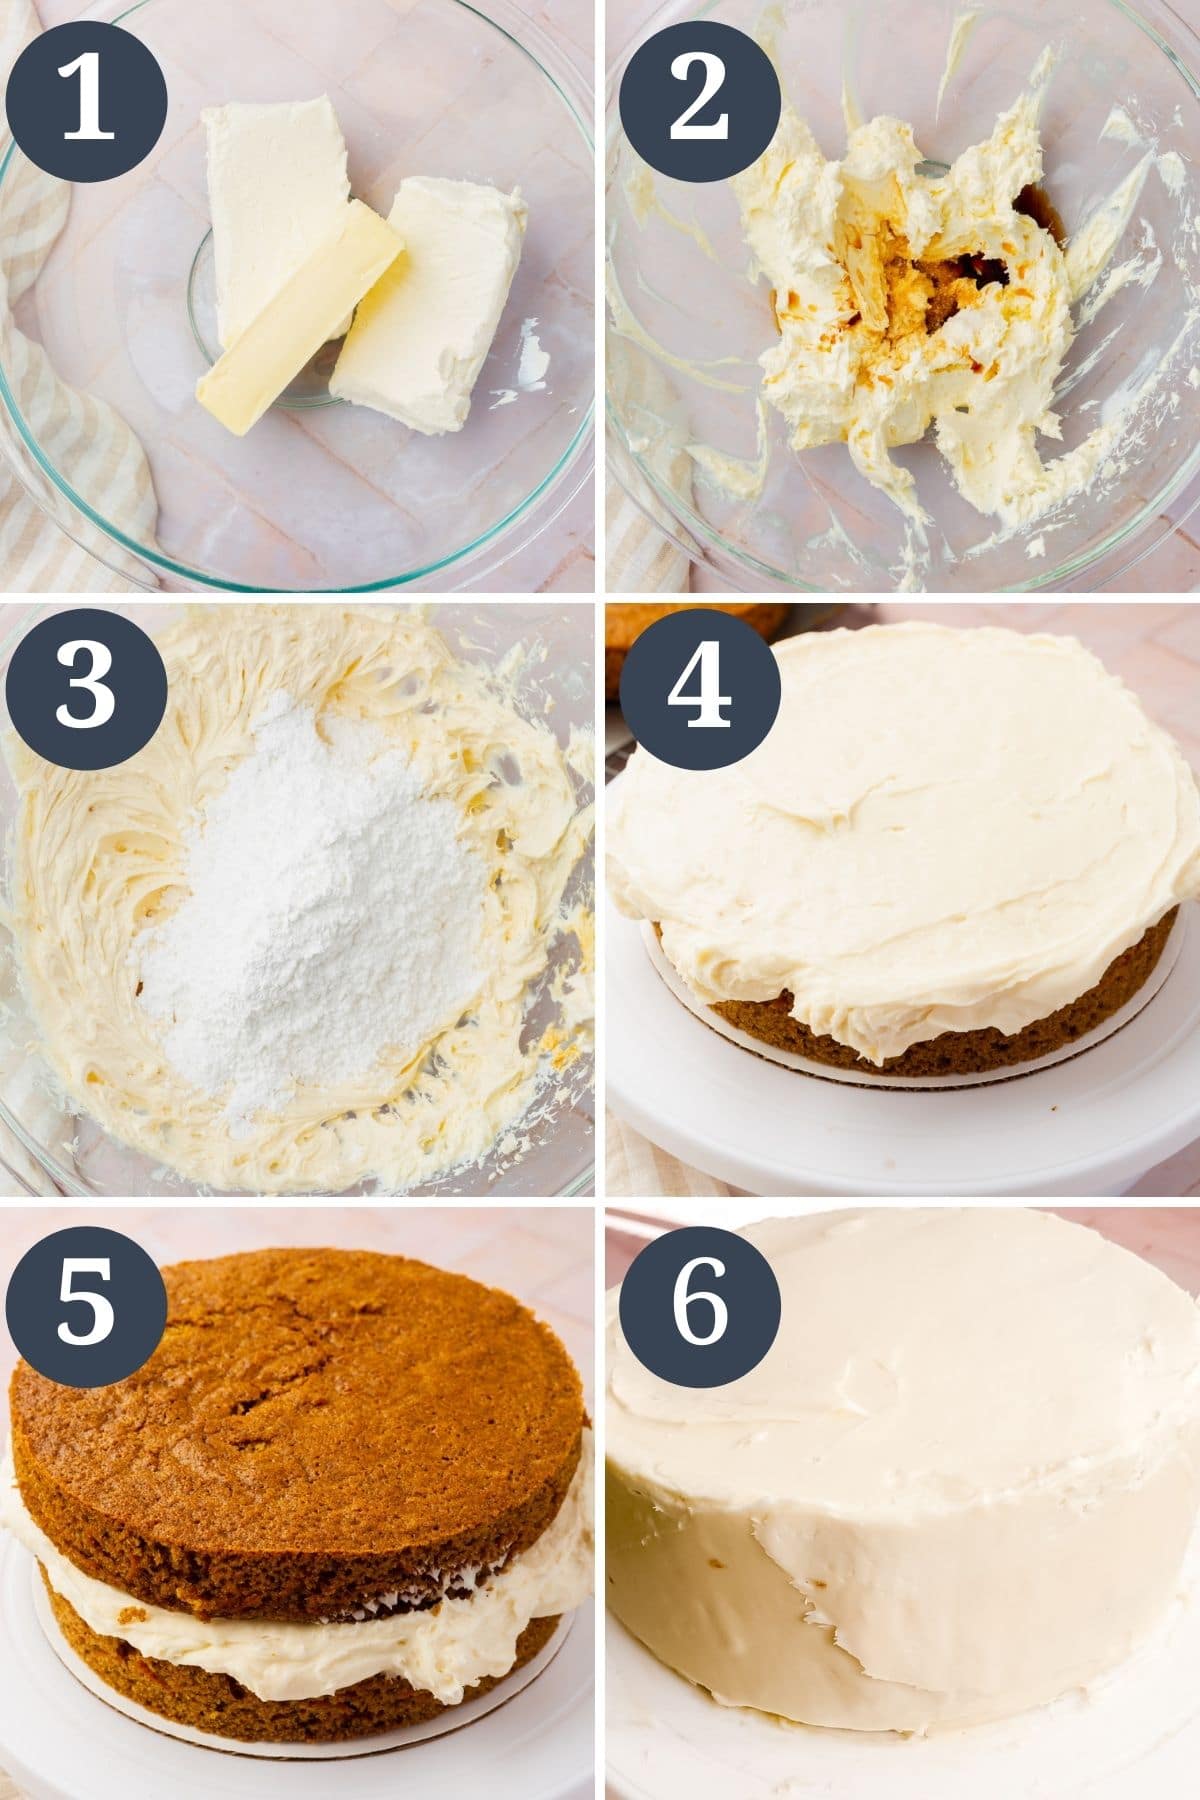 A collage showing the process to make cream cheese frosting, from adding butter and cream cheese to a mixing bowl, adding the vanilla and salt, mixing in powdered sugar, frosting one layer of the cake, topping with the second layer of cake, and frosting the cake.